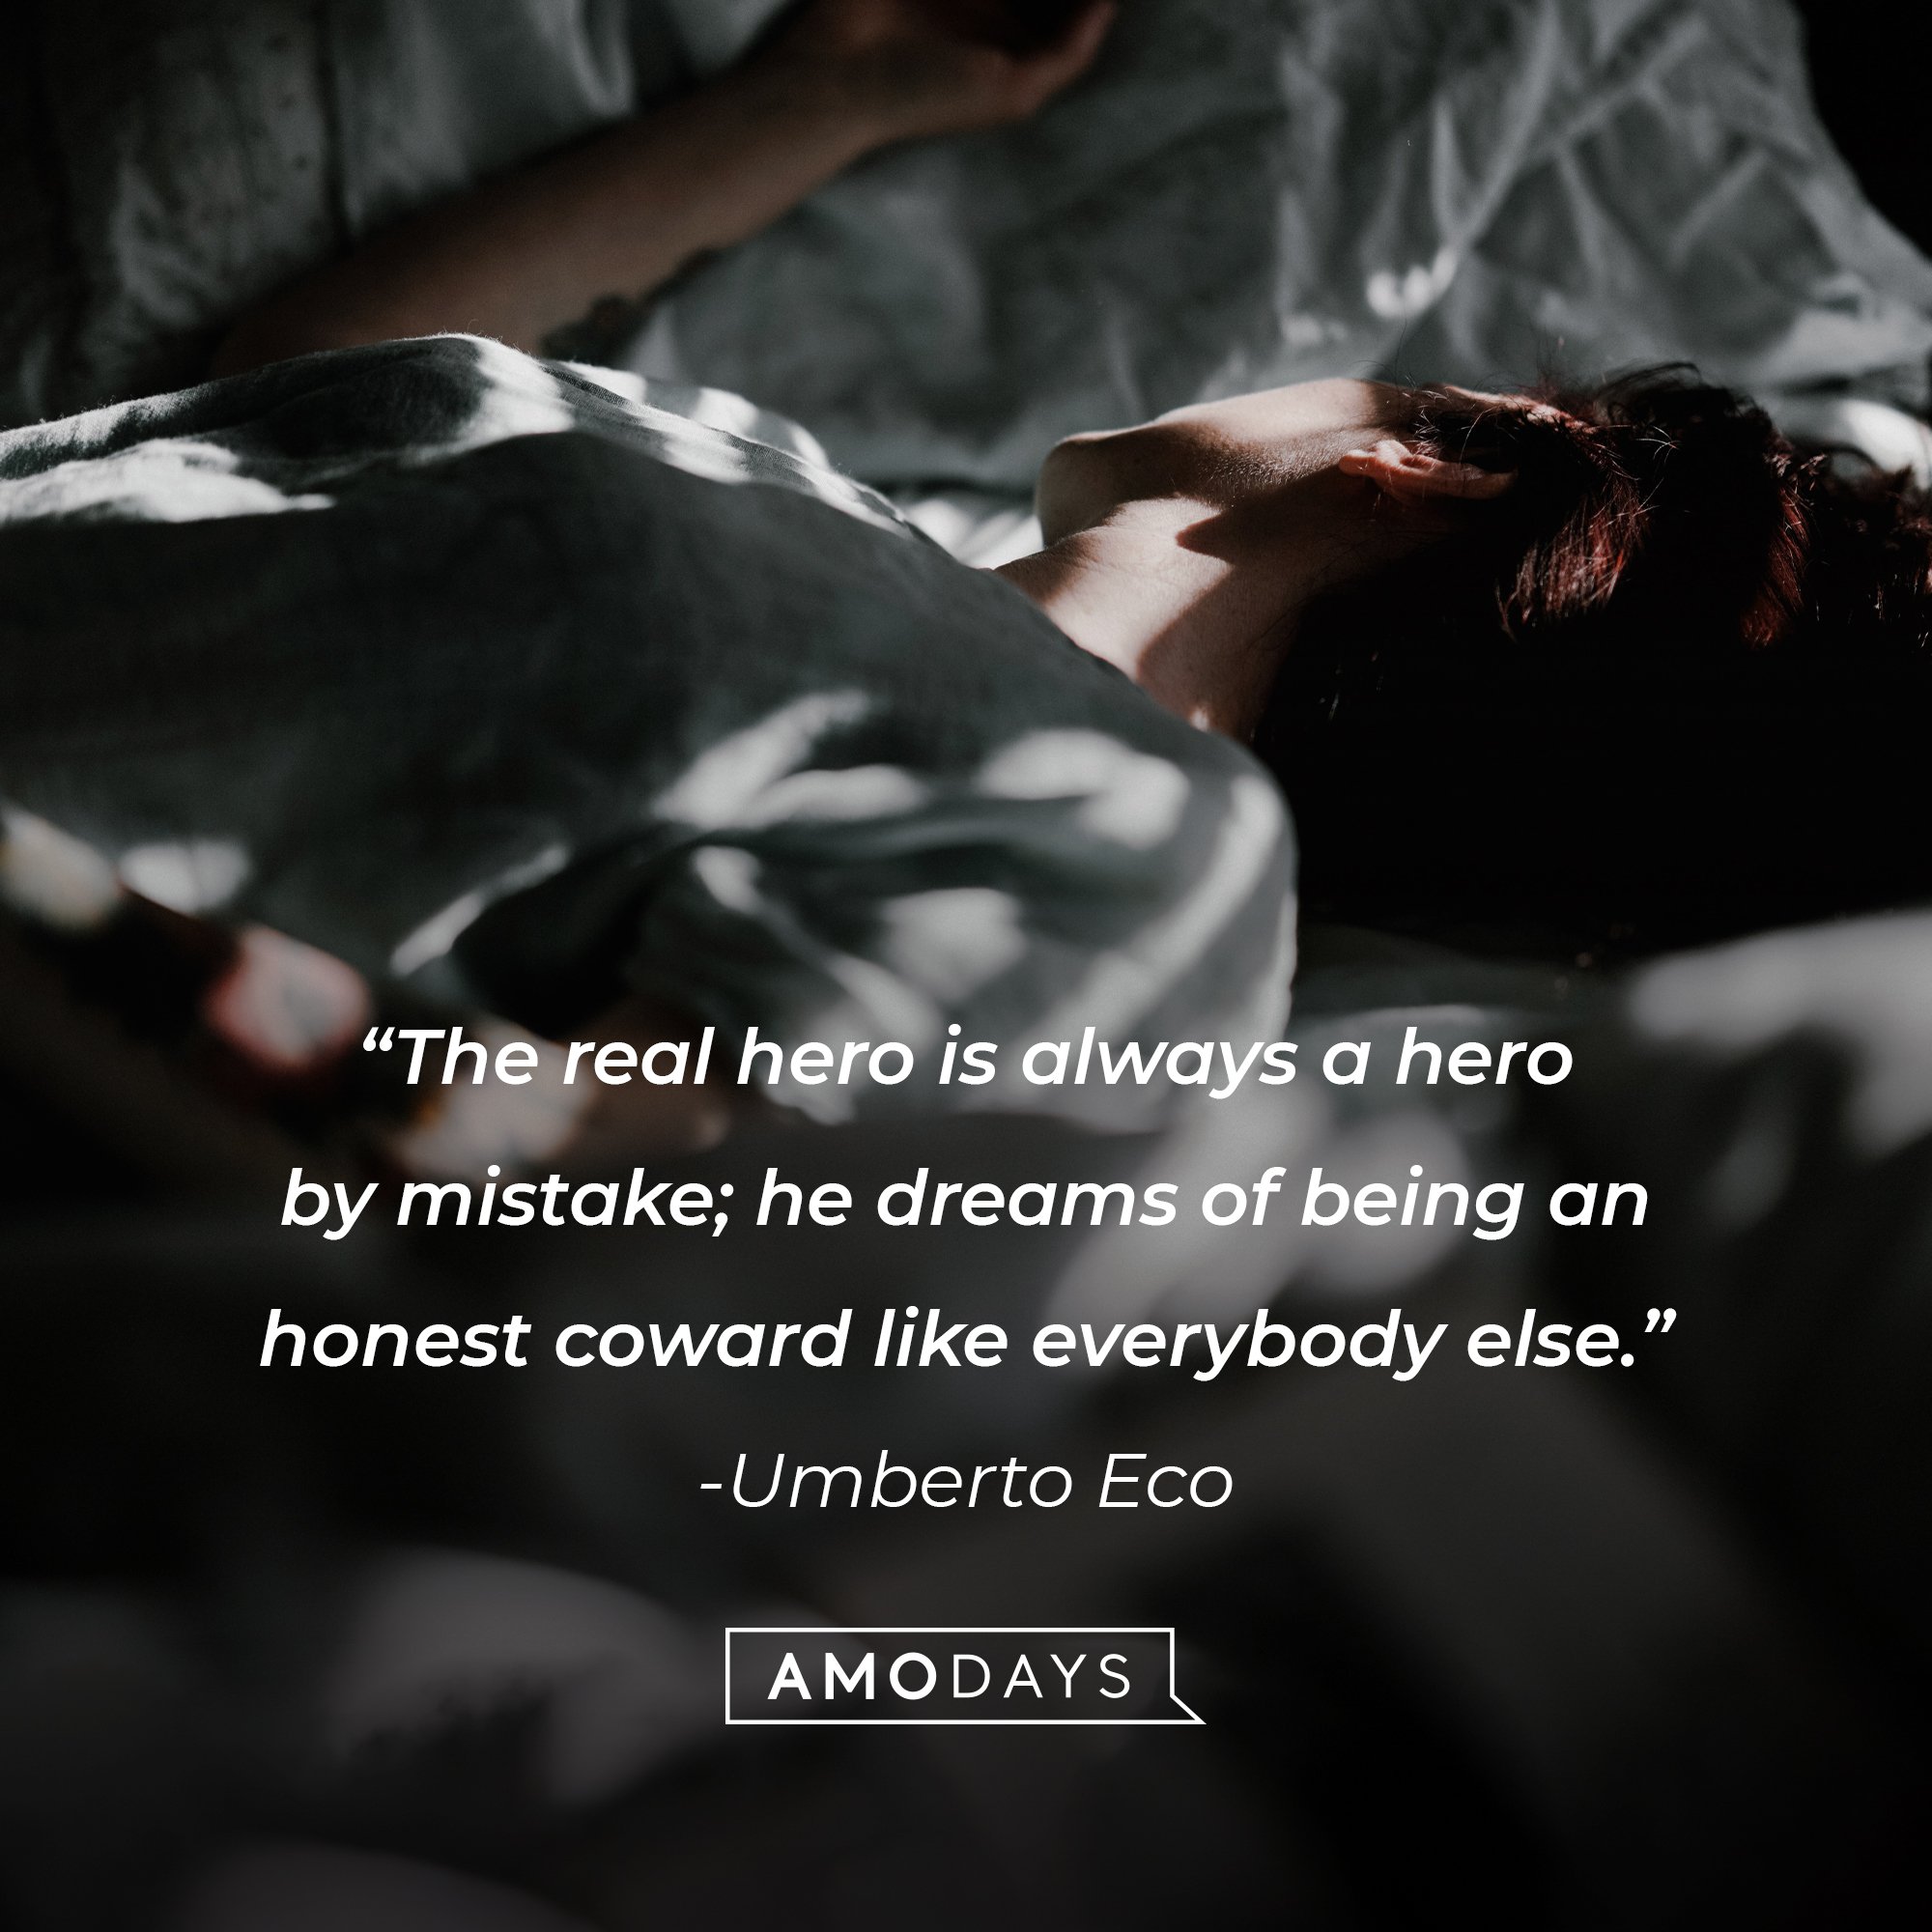 Umberto Eco's quote: "The real hero is always a hero by mistake; he dreams of being an honest coward like everybody else." | Image: AmoDays